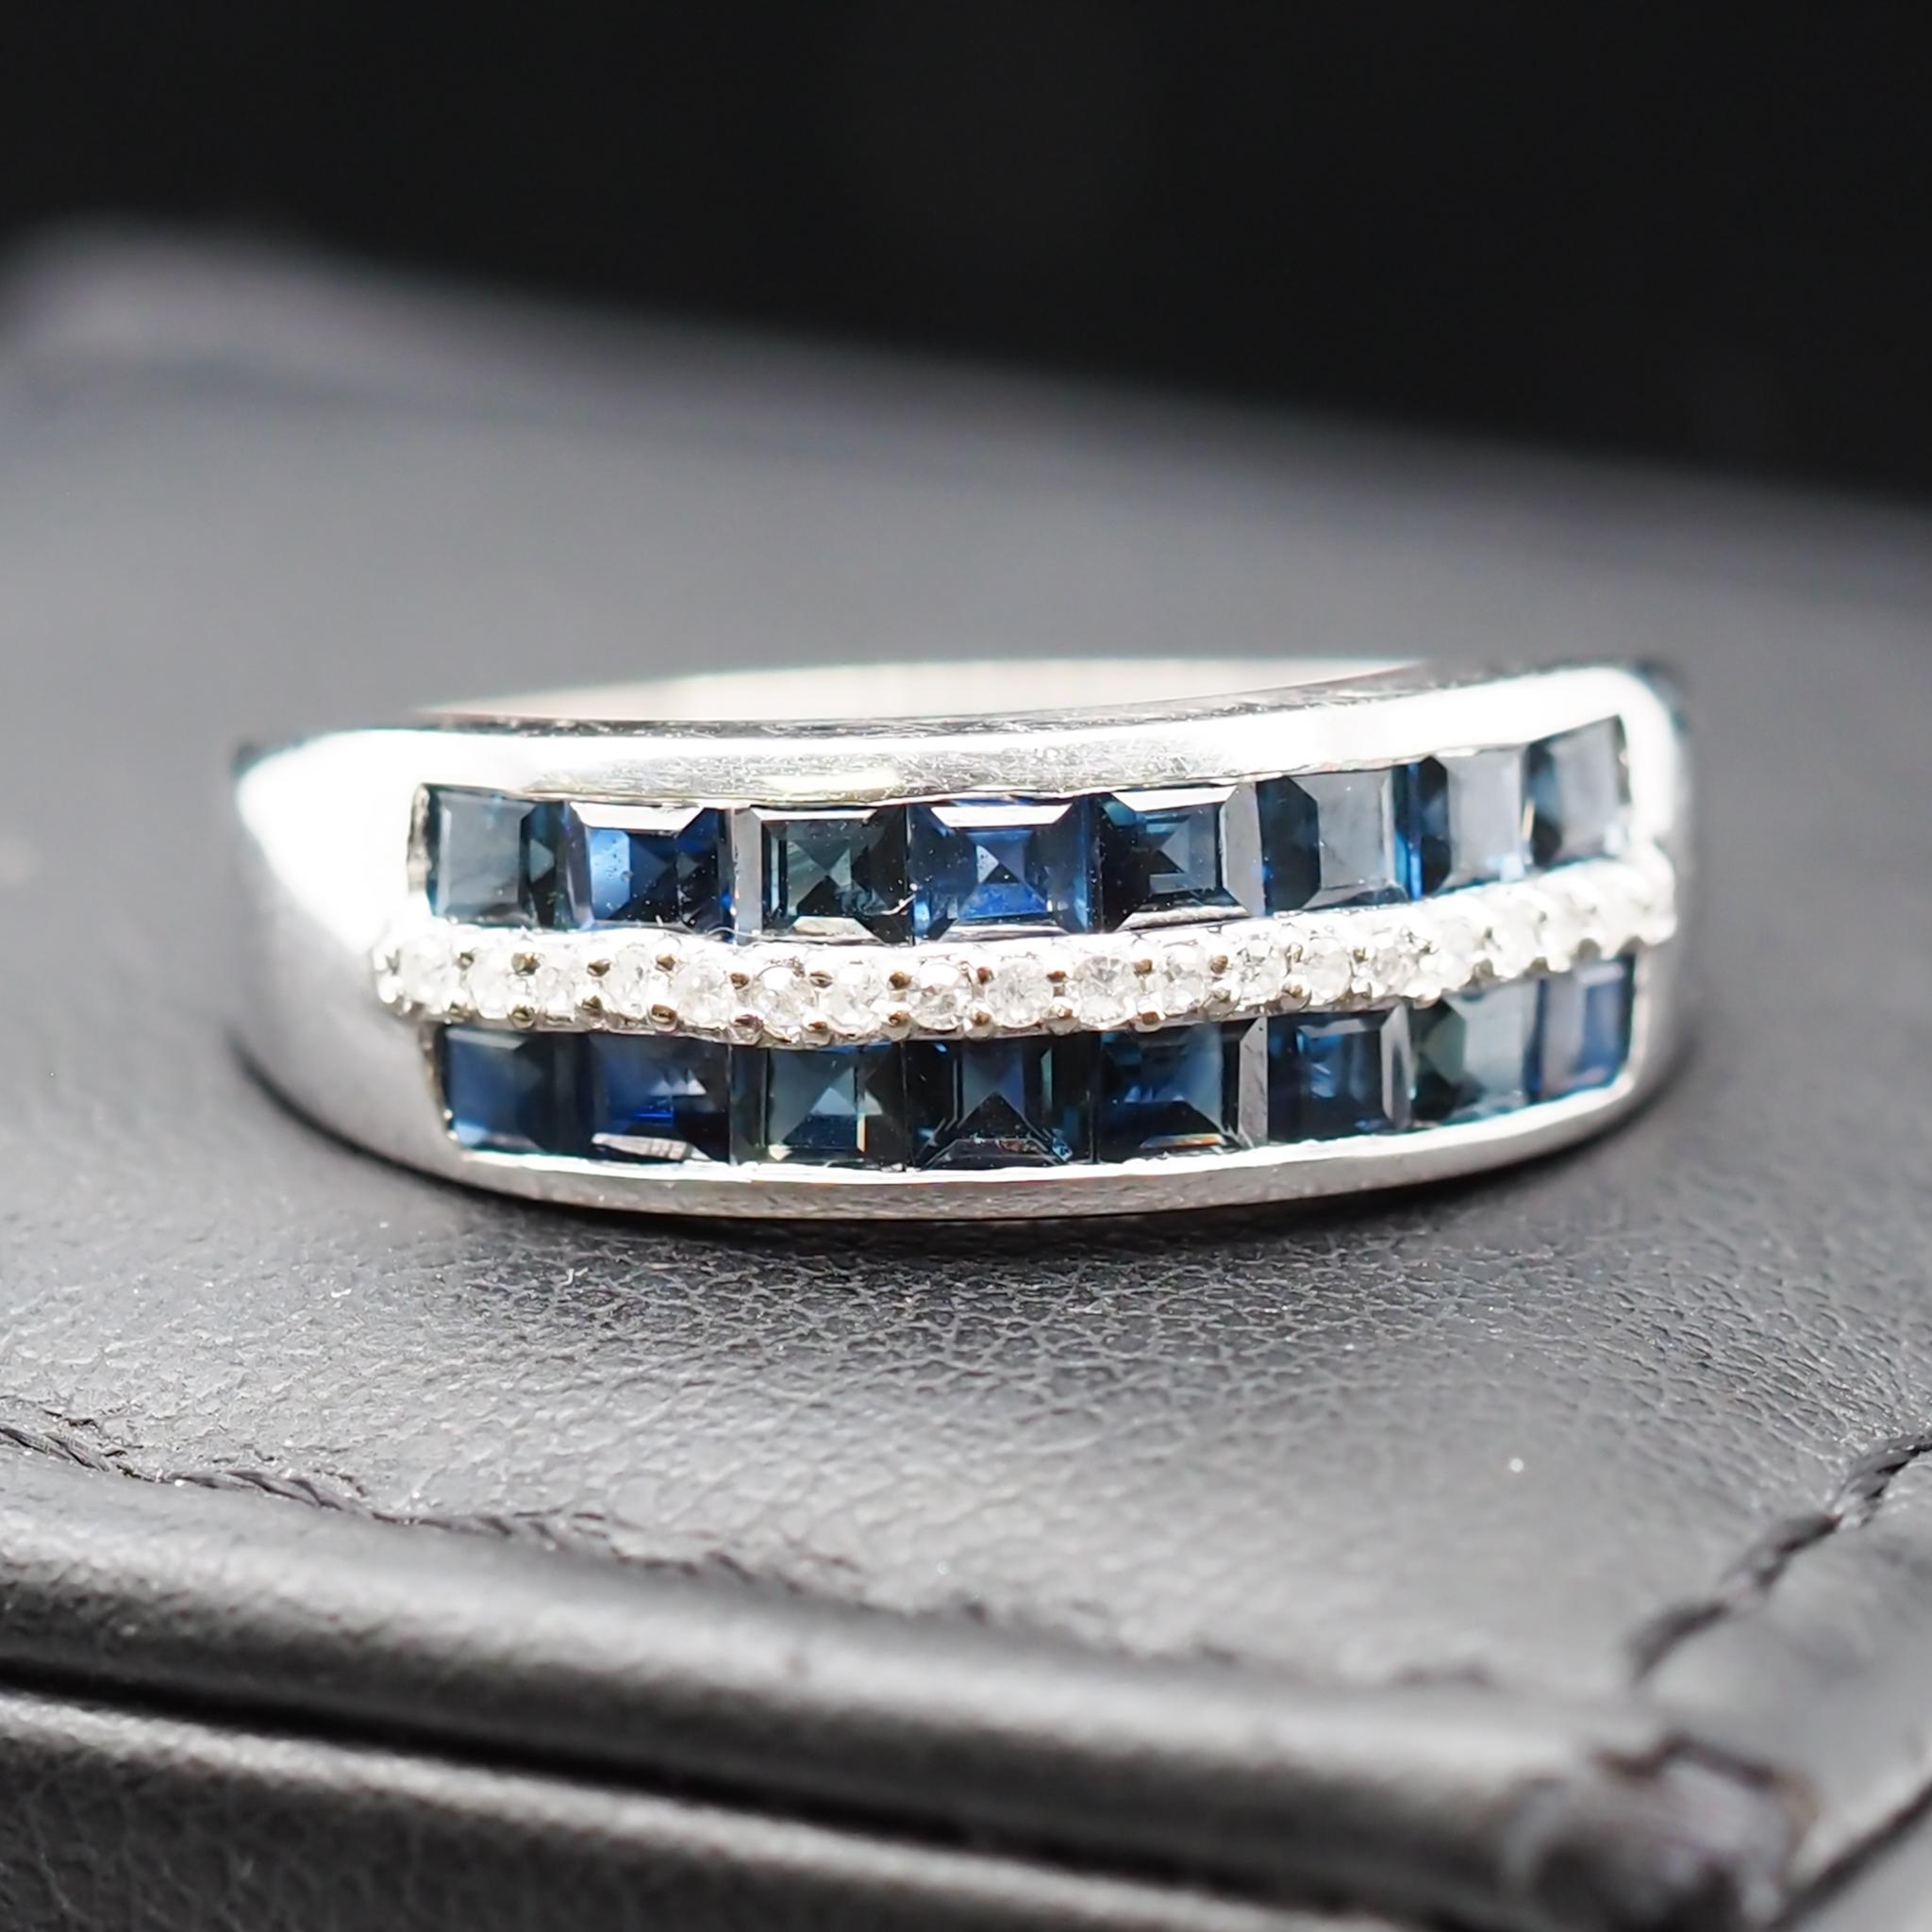 Year: 2000s

Item Details:
Ring Size: 7.25
Metal Type: 14K White Gold [Hallmarked, and Tested]
Weight: 3.0 grams

Diamond Details: .15ct total weight, round brilliant, natural diamonds. H Color, SI Clarity.

Side Stone Details: Sapphires, Natural,